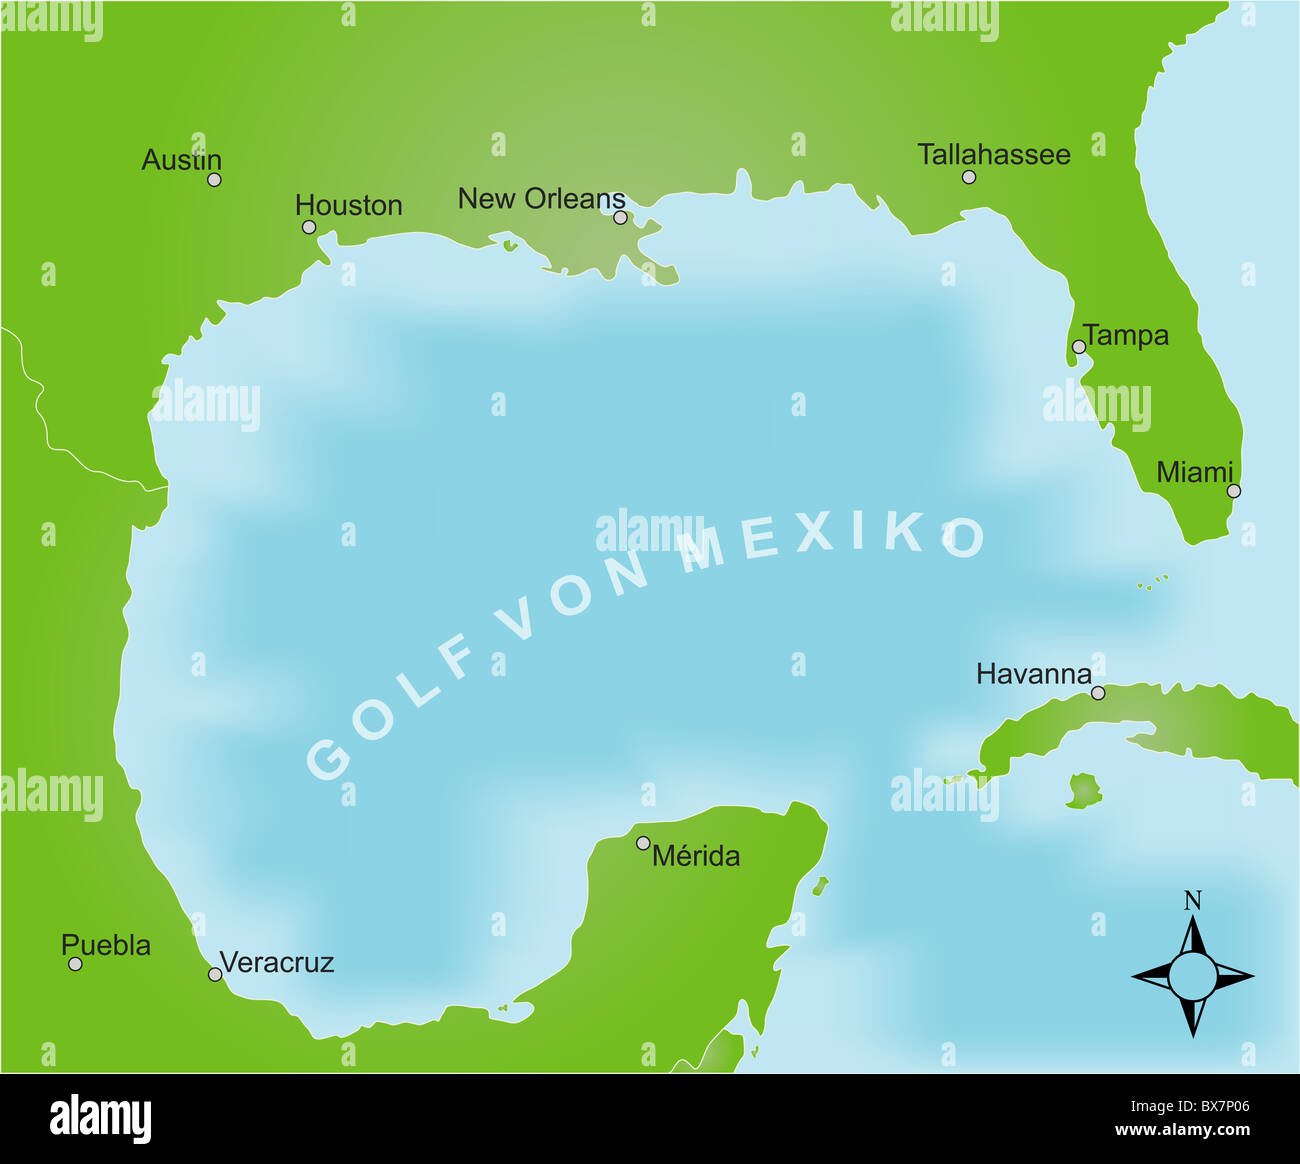 Stylized map of the area of the gulf of mexico. German captions. Stock Photo